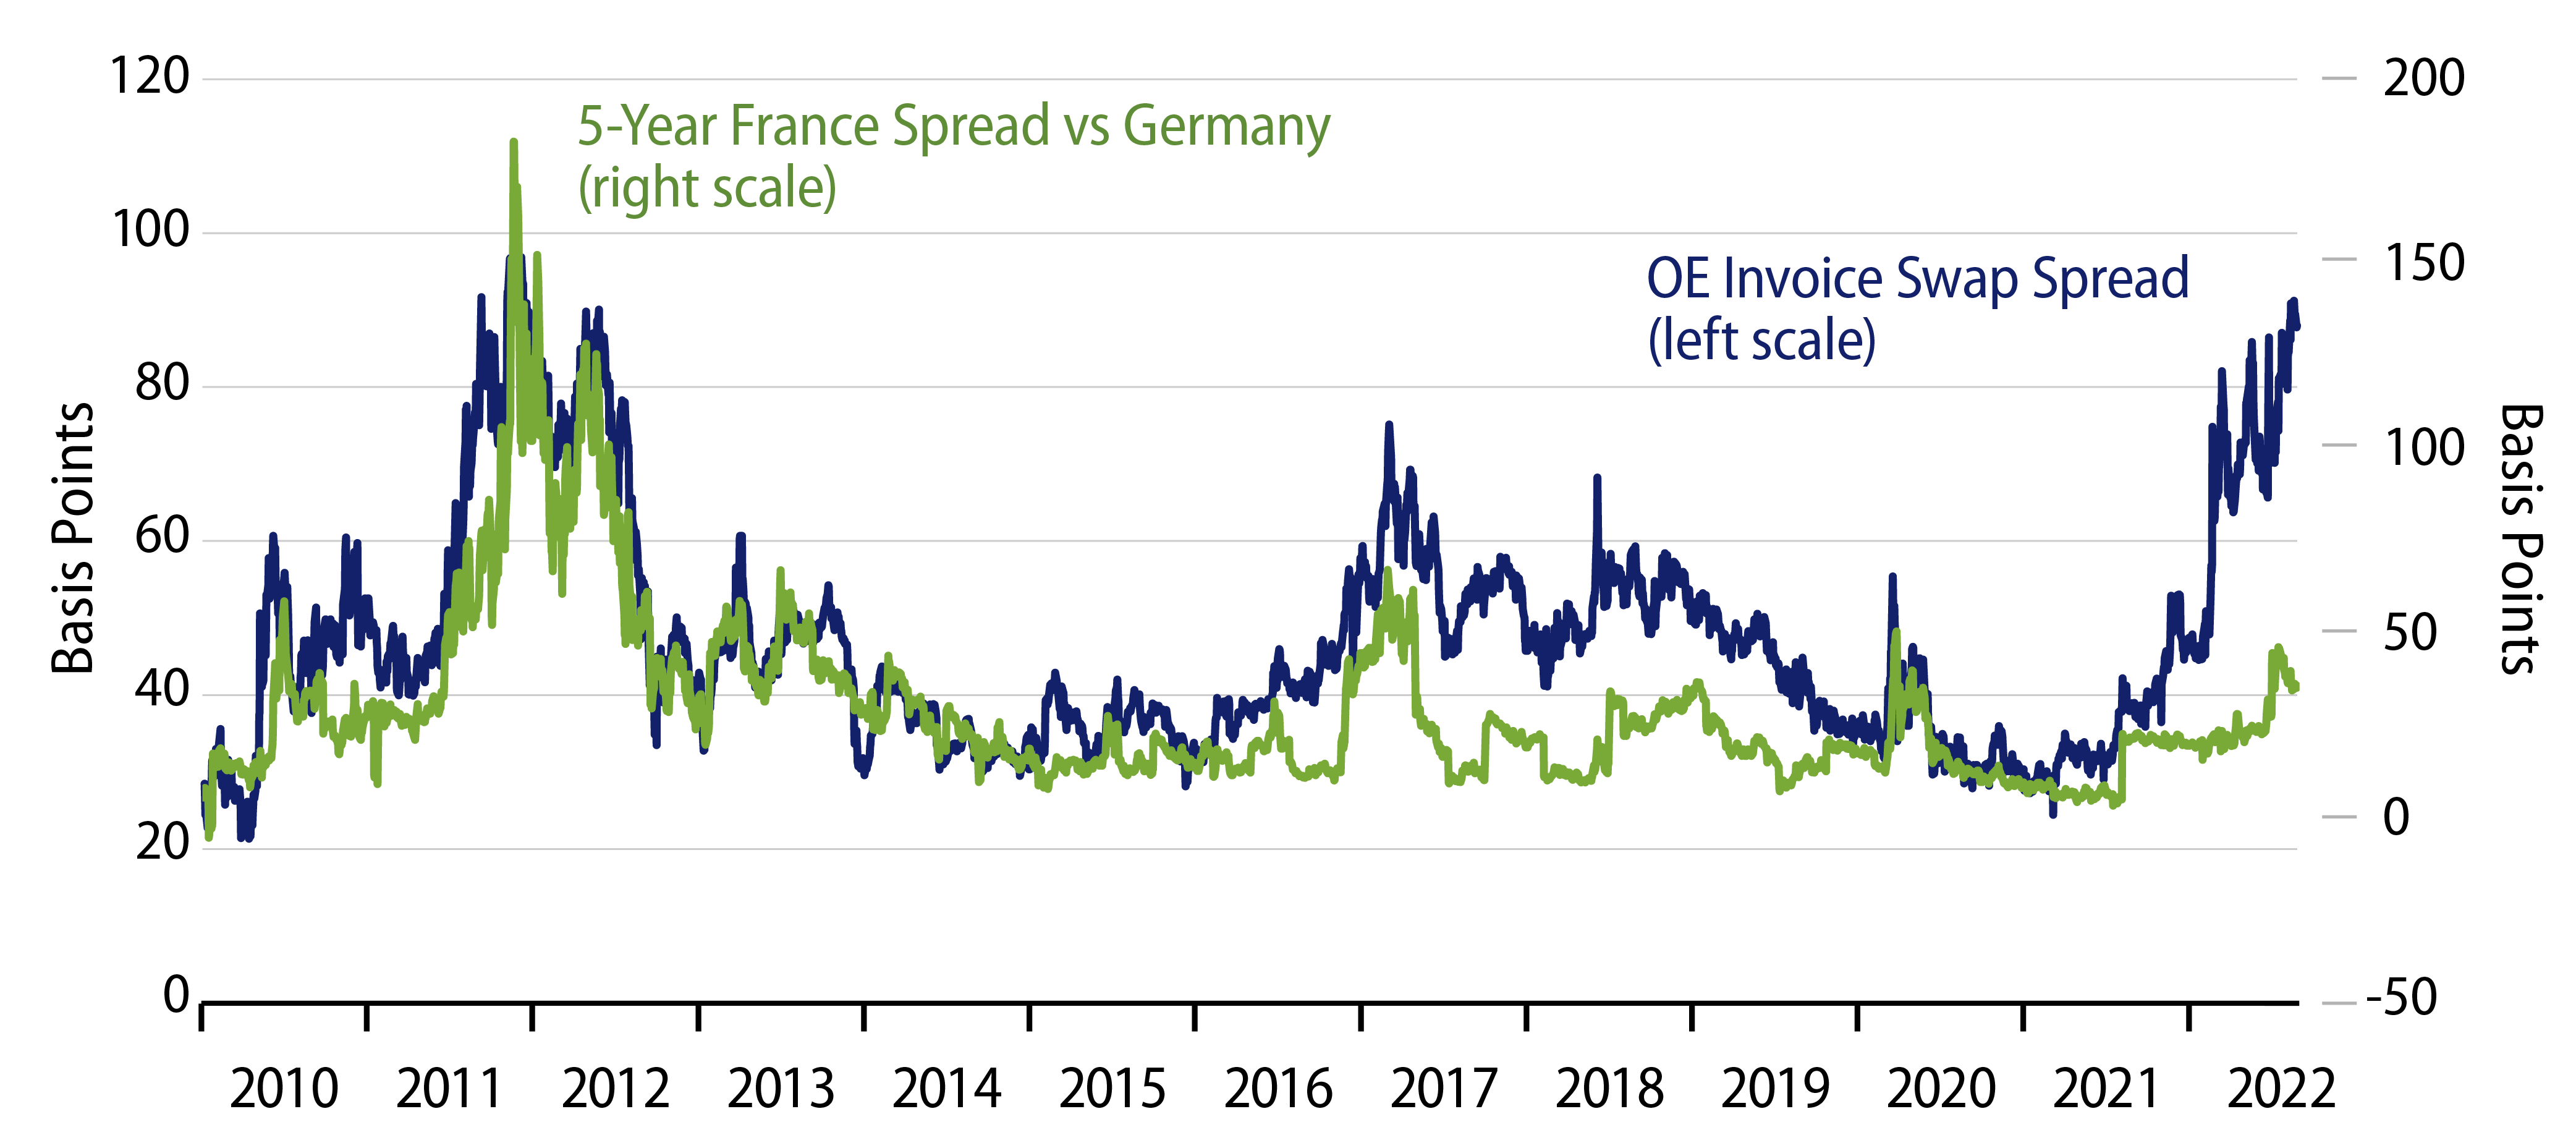 OE Invoice Swap Spread and 5-Year France vs. Germany Spread